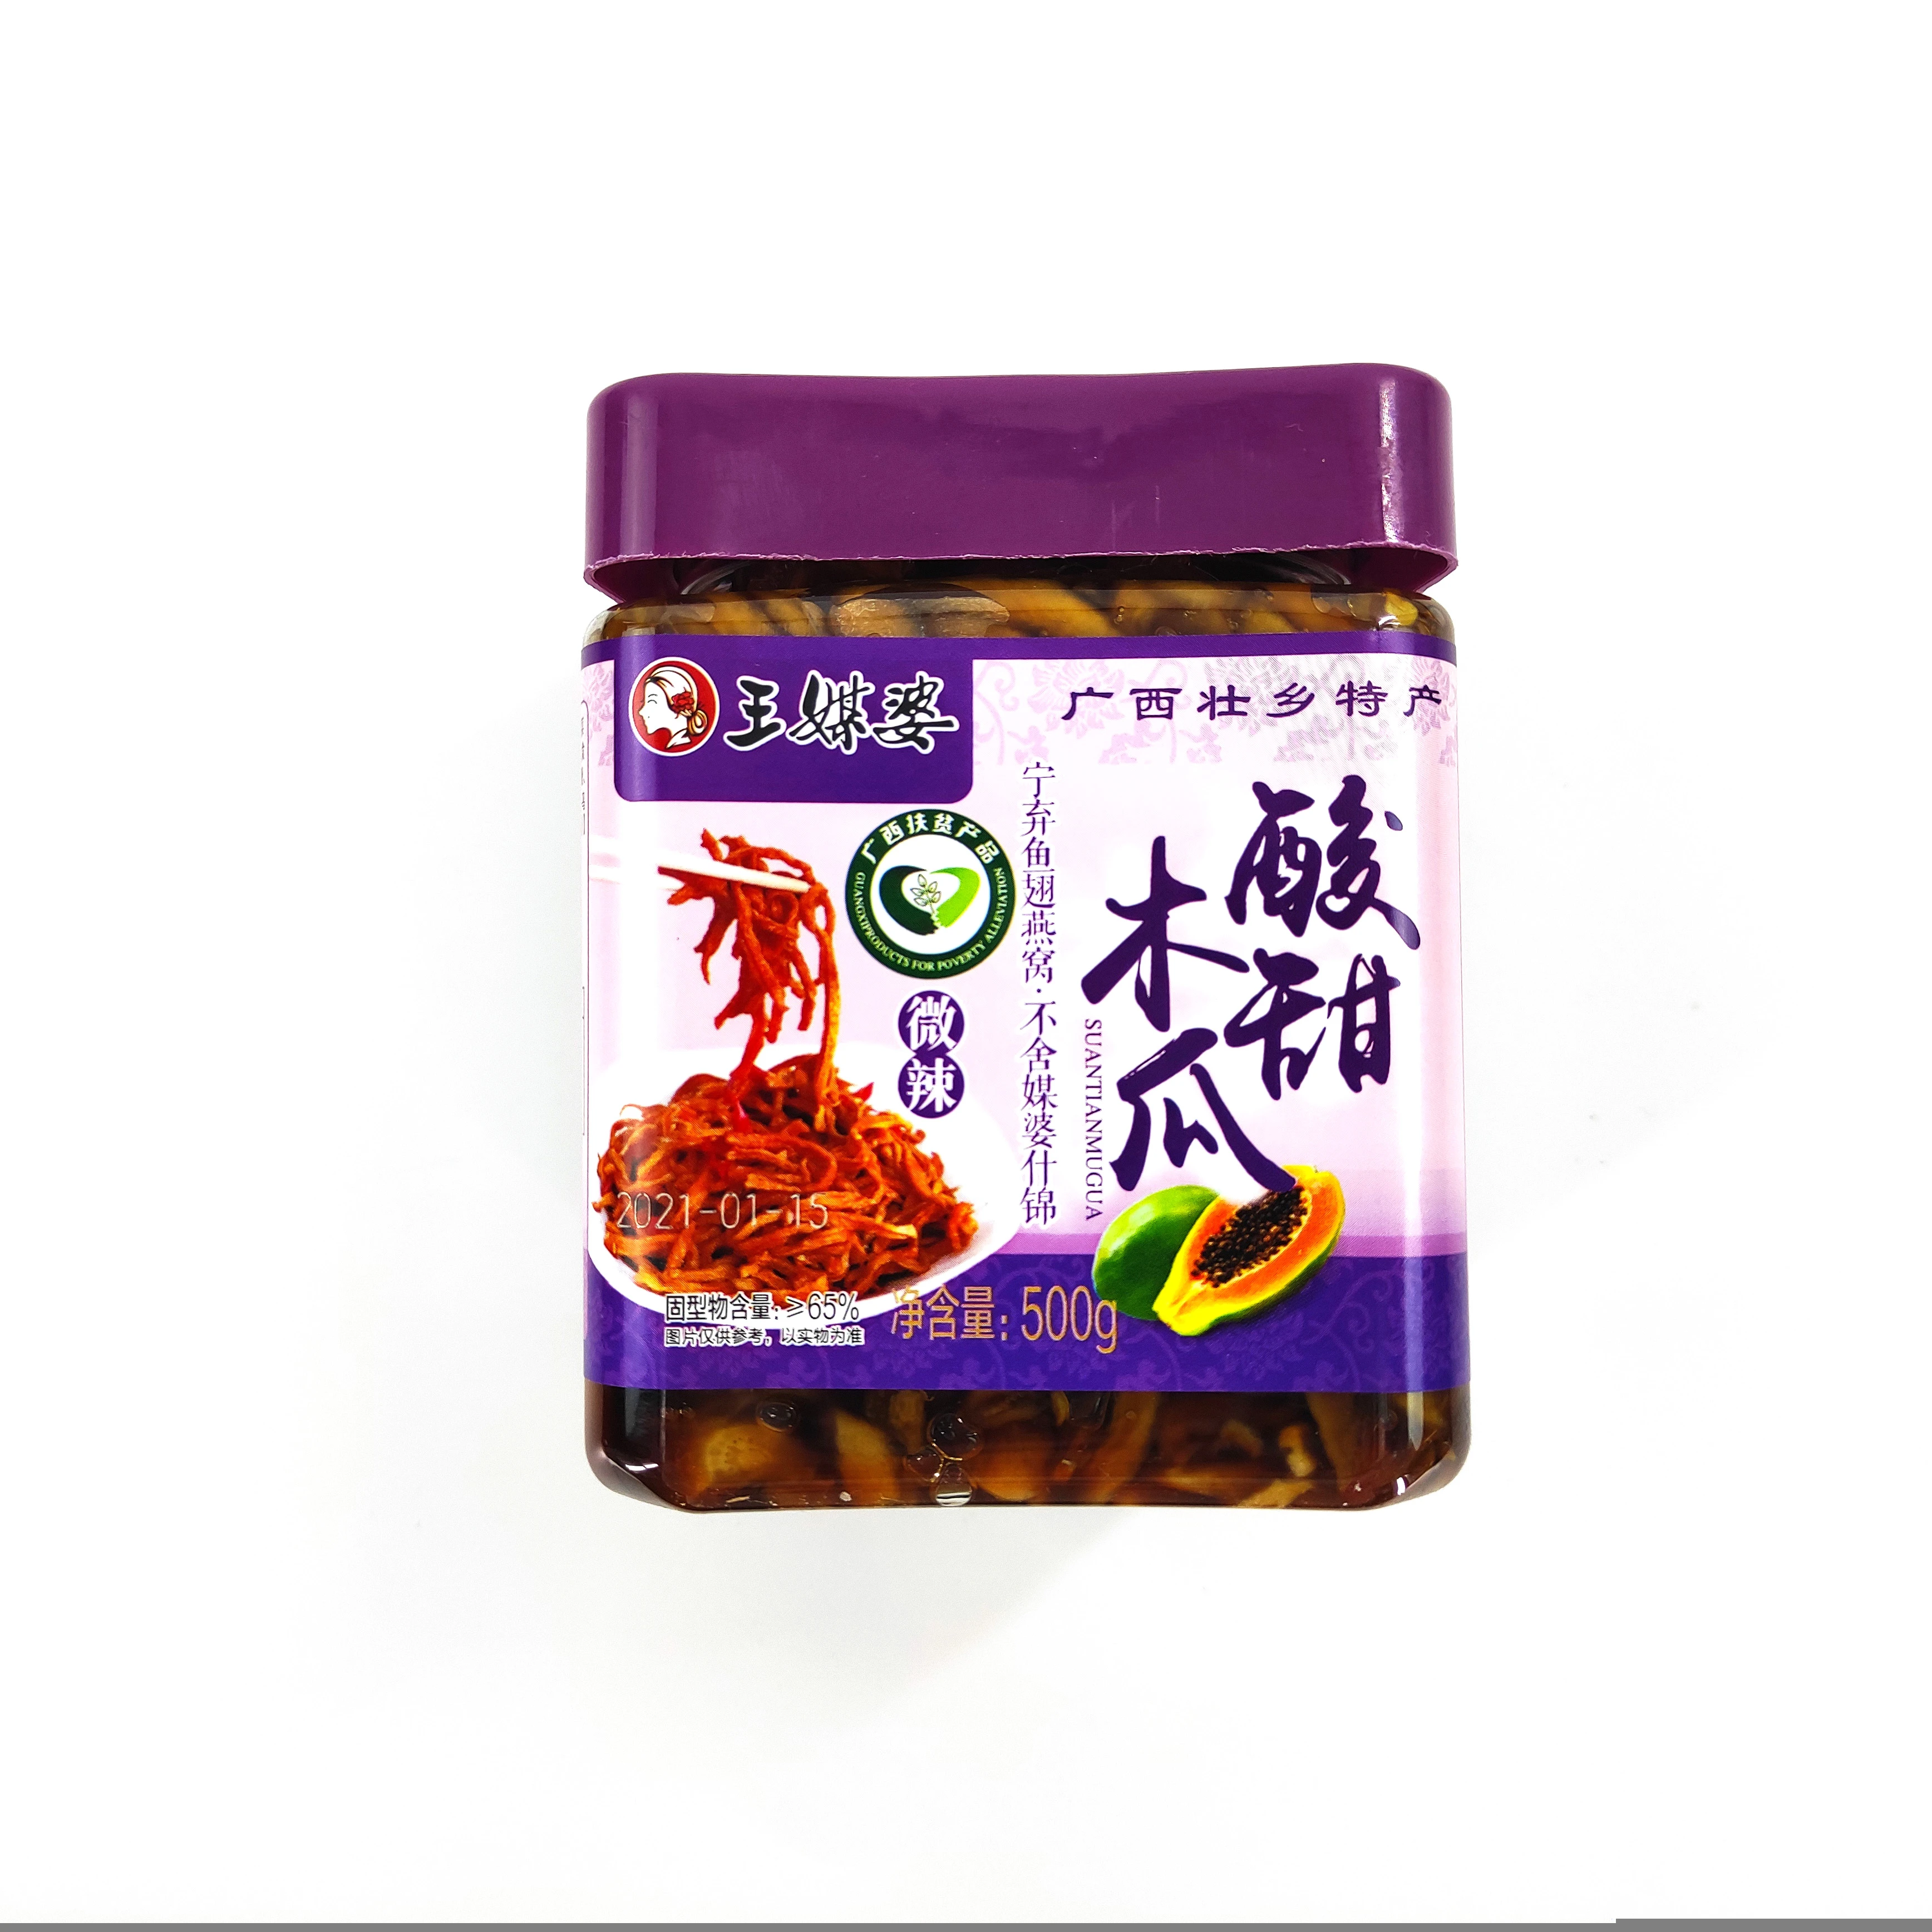 Hot Selling Chinese Food Delicious Pickled Pruducts Pickled Vegetables Dried Papaya Seasoinng